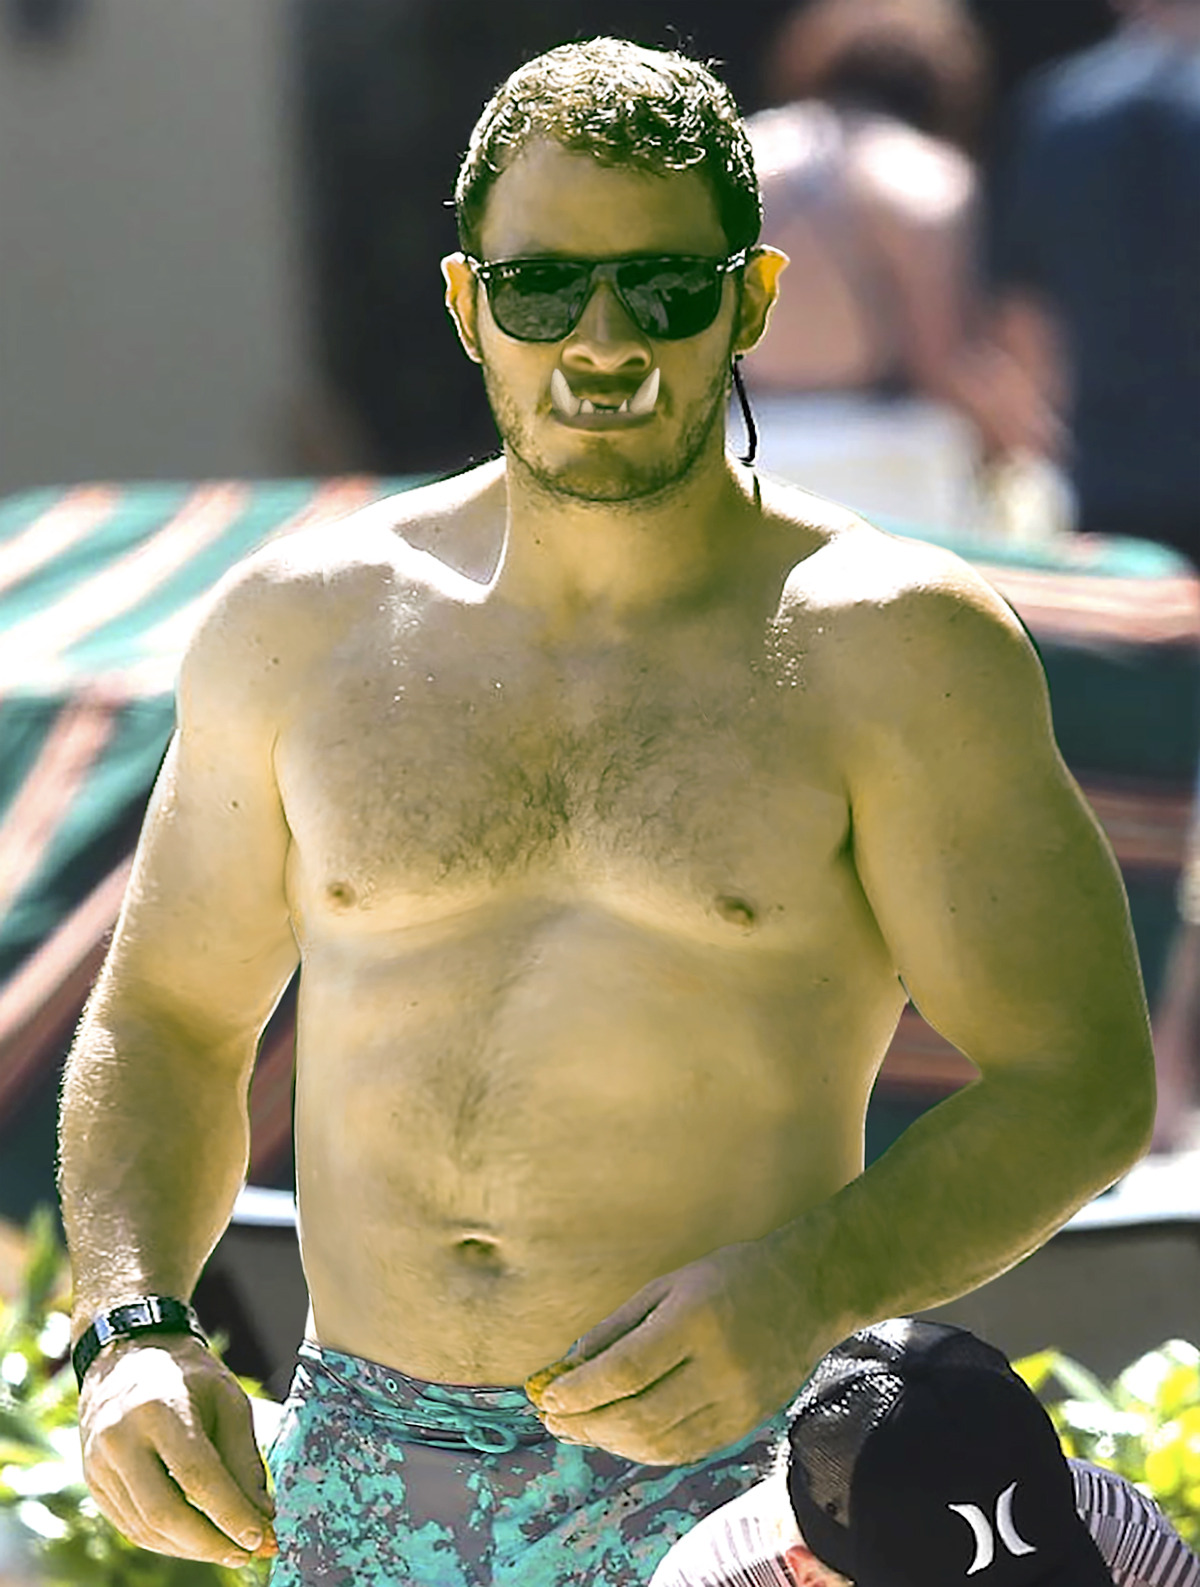 This orc story over at @itsflyinglikeadragon made me want to orc up Chris Pratt.